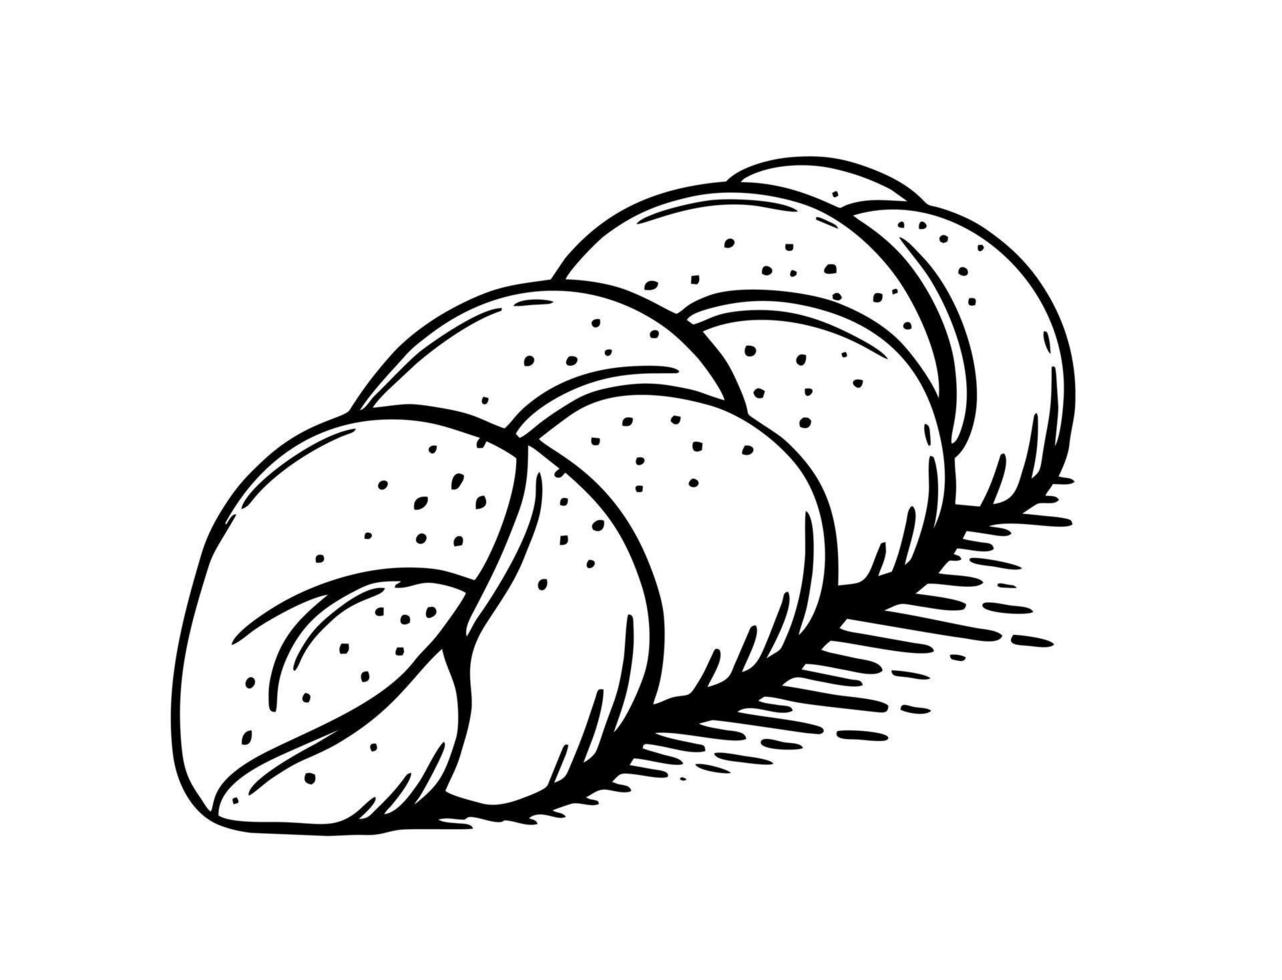 Bread basket is a hand-drawn bakery element Vector sketch of doodles. For cafe and bakery menus